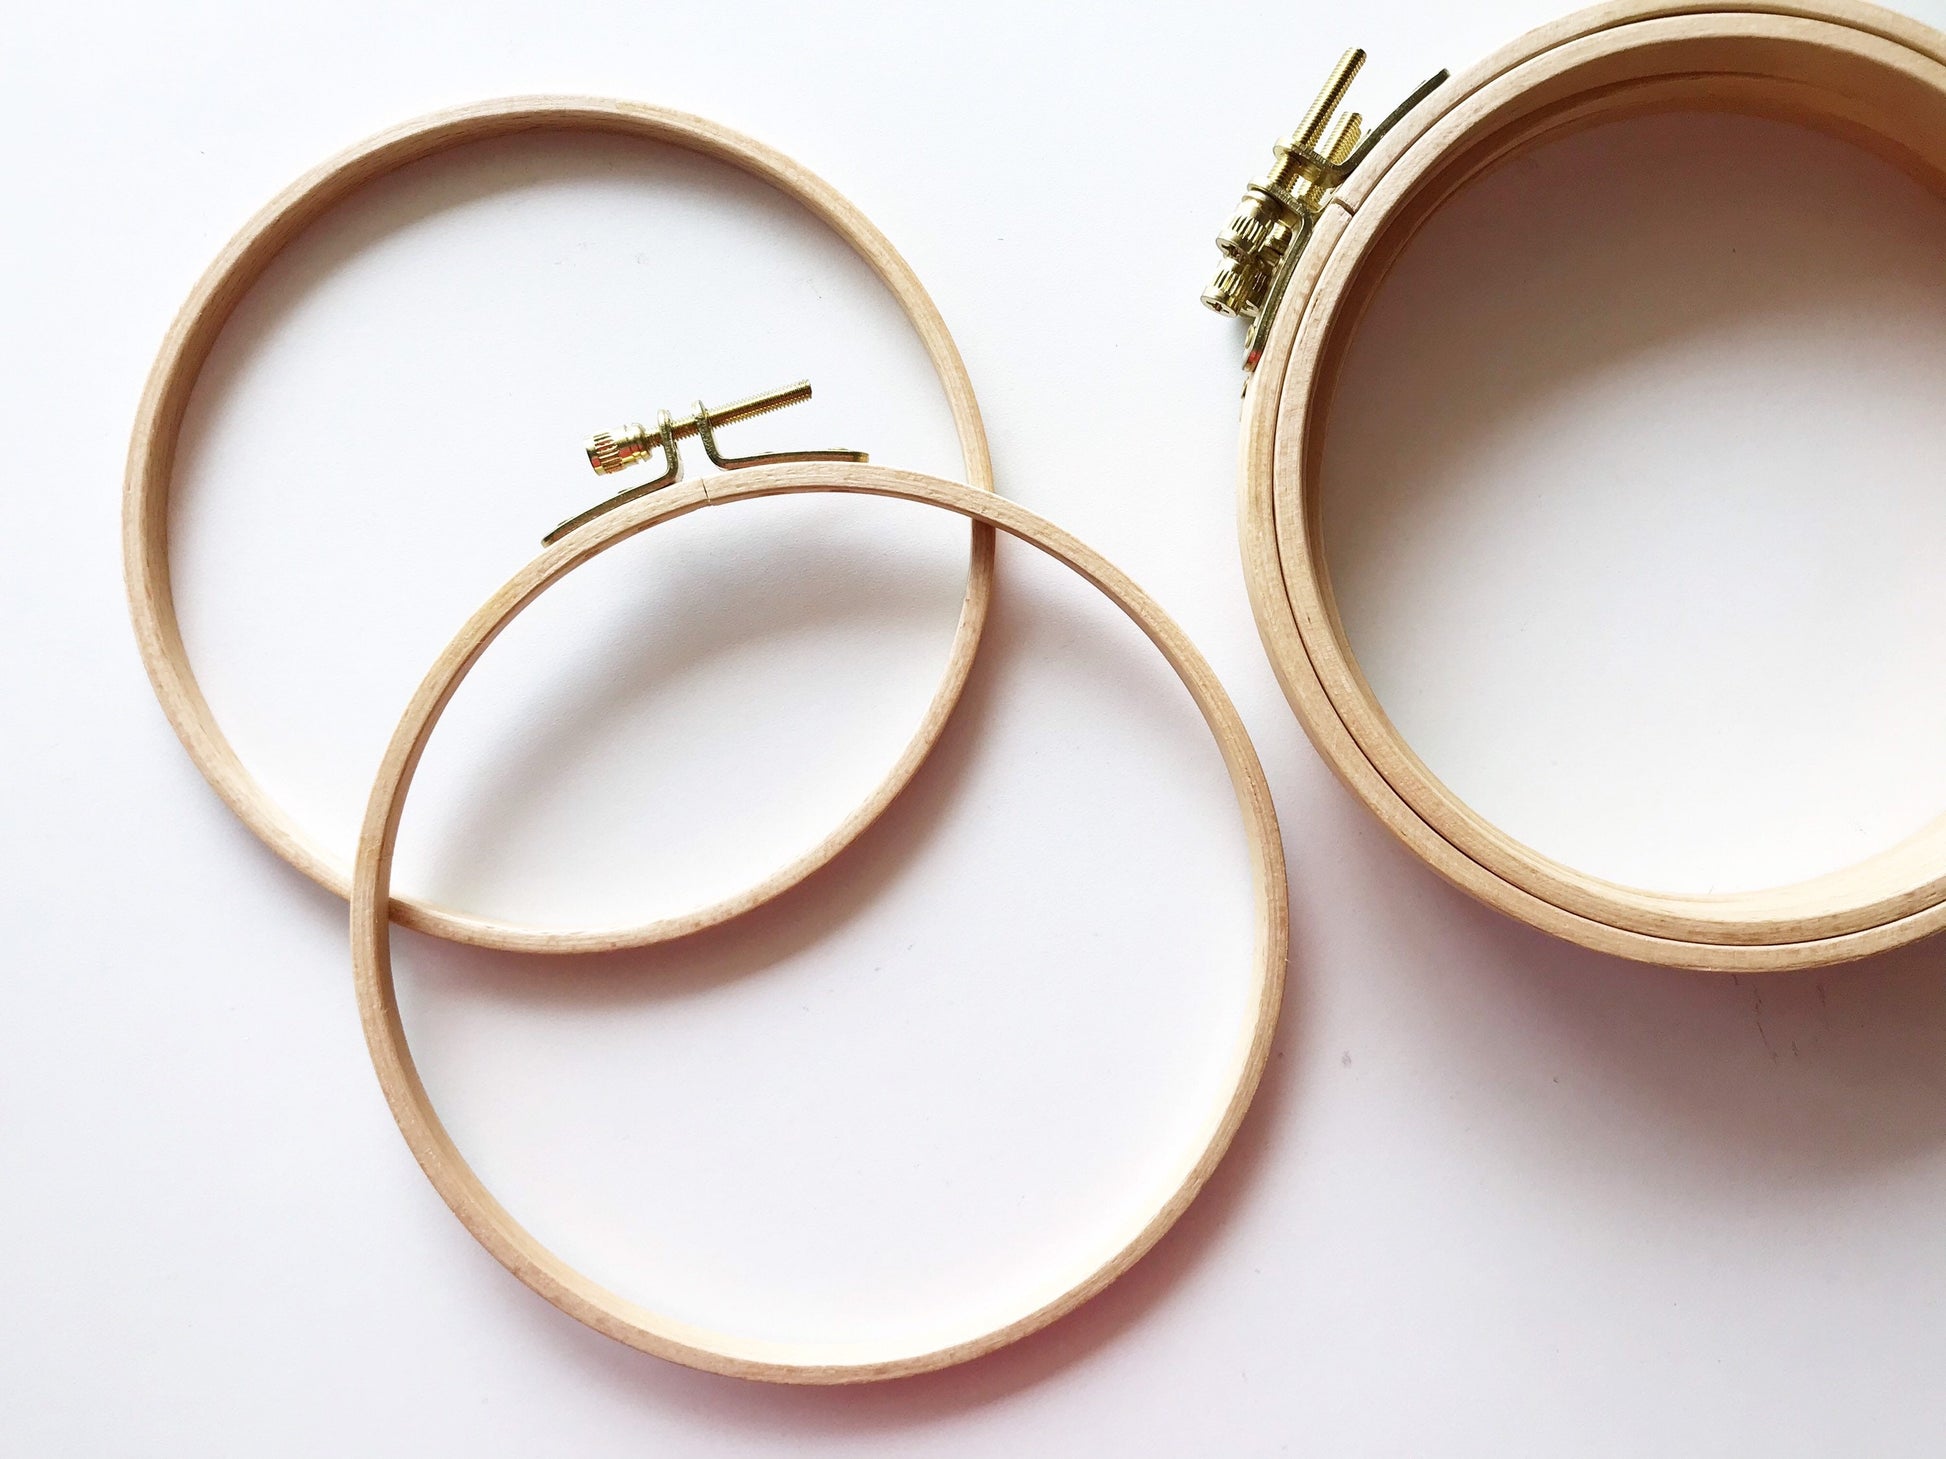 Beech Wood Embroidery Hoop, 2 Packs 6 Inch Cross Stitch Hoops, Splinters  Free Embroidery Frames for Art Craft Sewing and Decoration Hanging